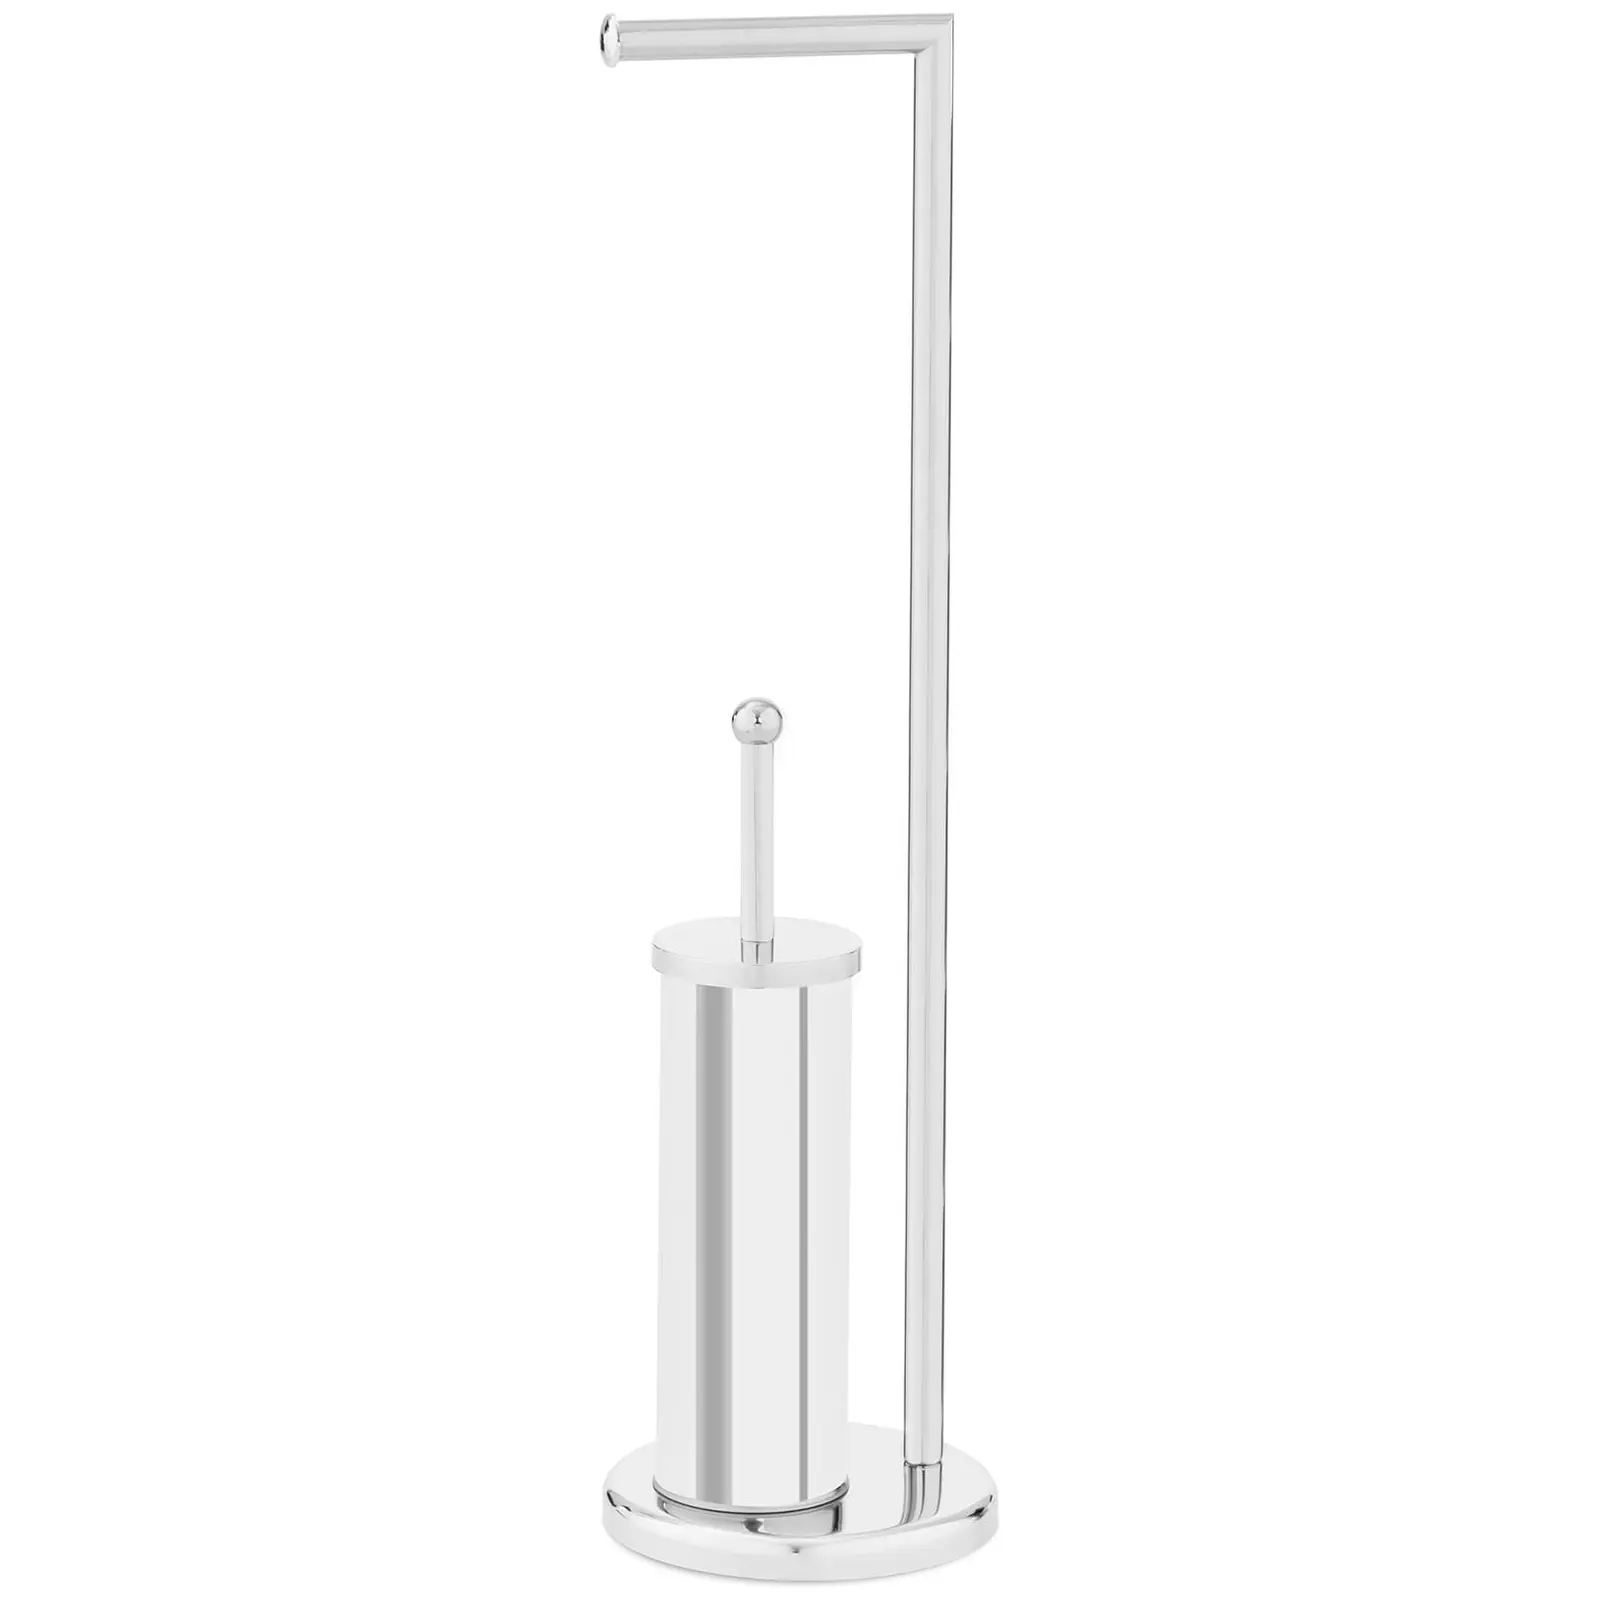 Stainless Steel Toilet Roll Holder - with toilet brush and holder